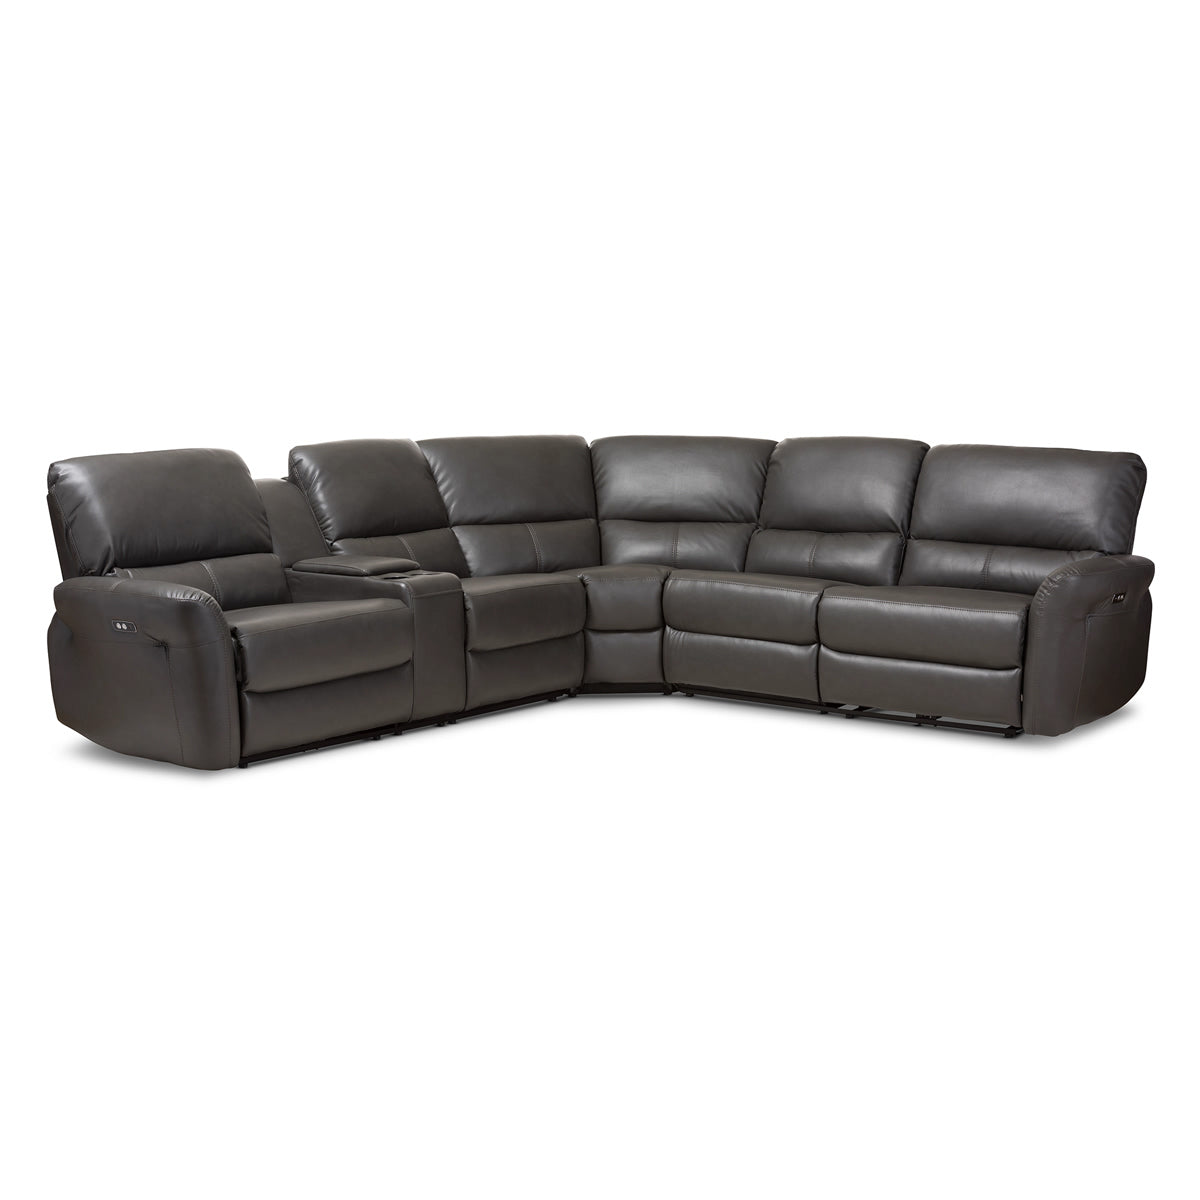 Baxton Studio Amaris Modern and Contemporary Grey Bonded Leather 5-Piece Power Reclining Sectional Sofa with USB Ports Baxton Studio-sofas-Minimal And Modern - 1